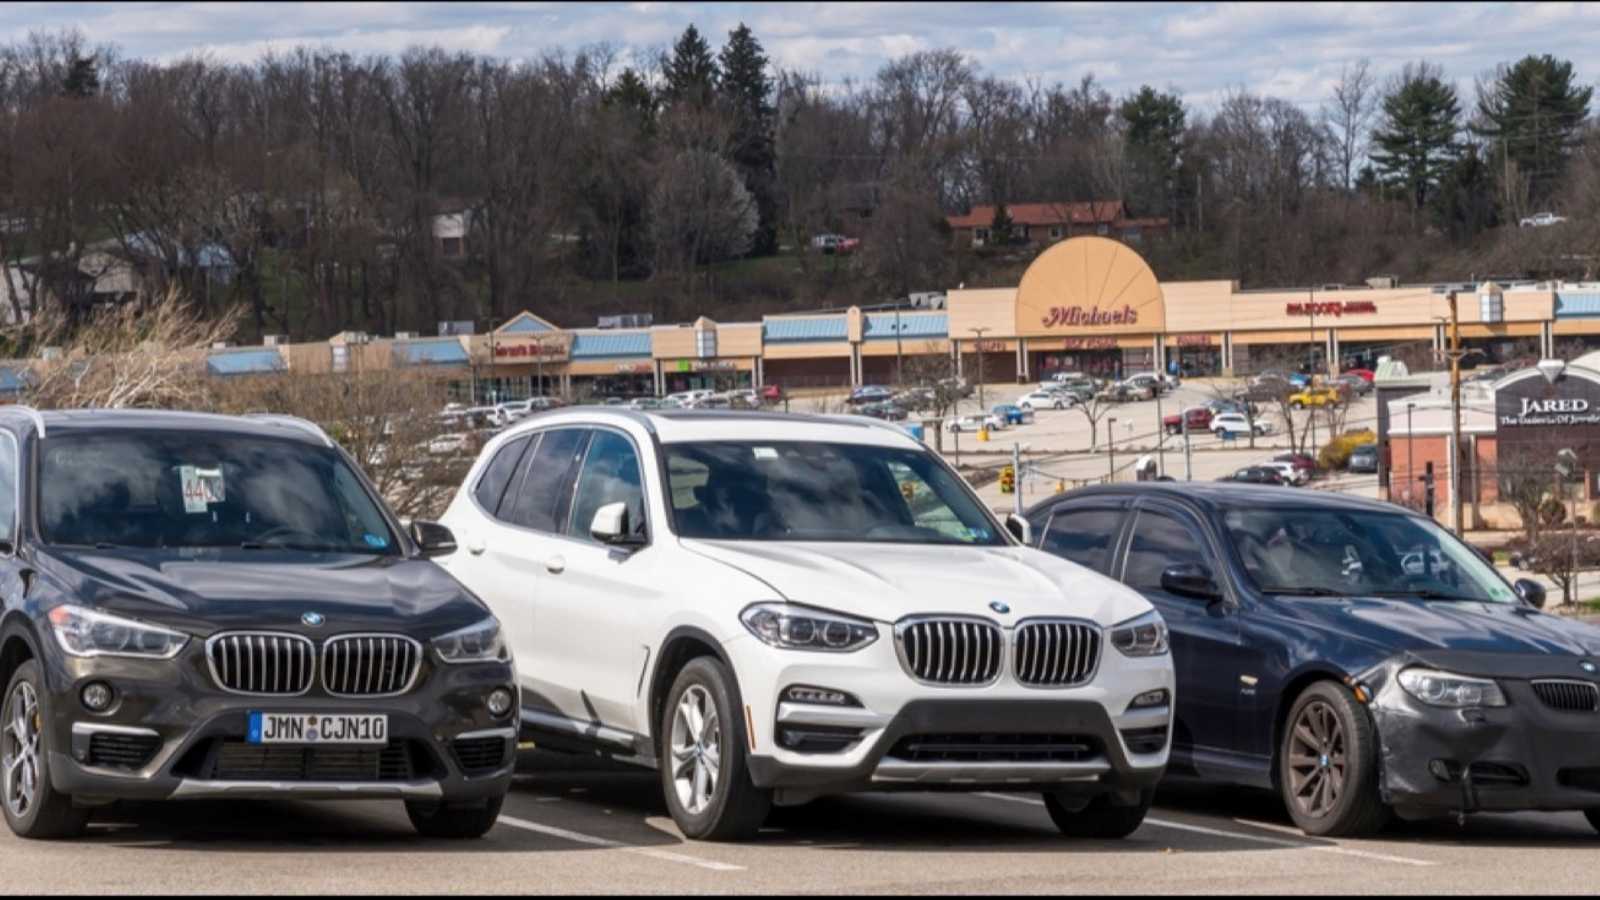 Monroeville, Pennsylvania, USA April 10, 2022 Three different BMW vehicles lined up at a dealership with a outdoor mall in the distance on a sunny spring day